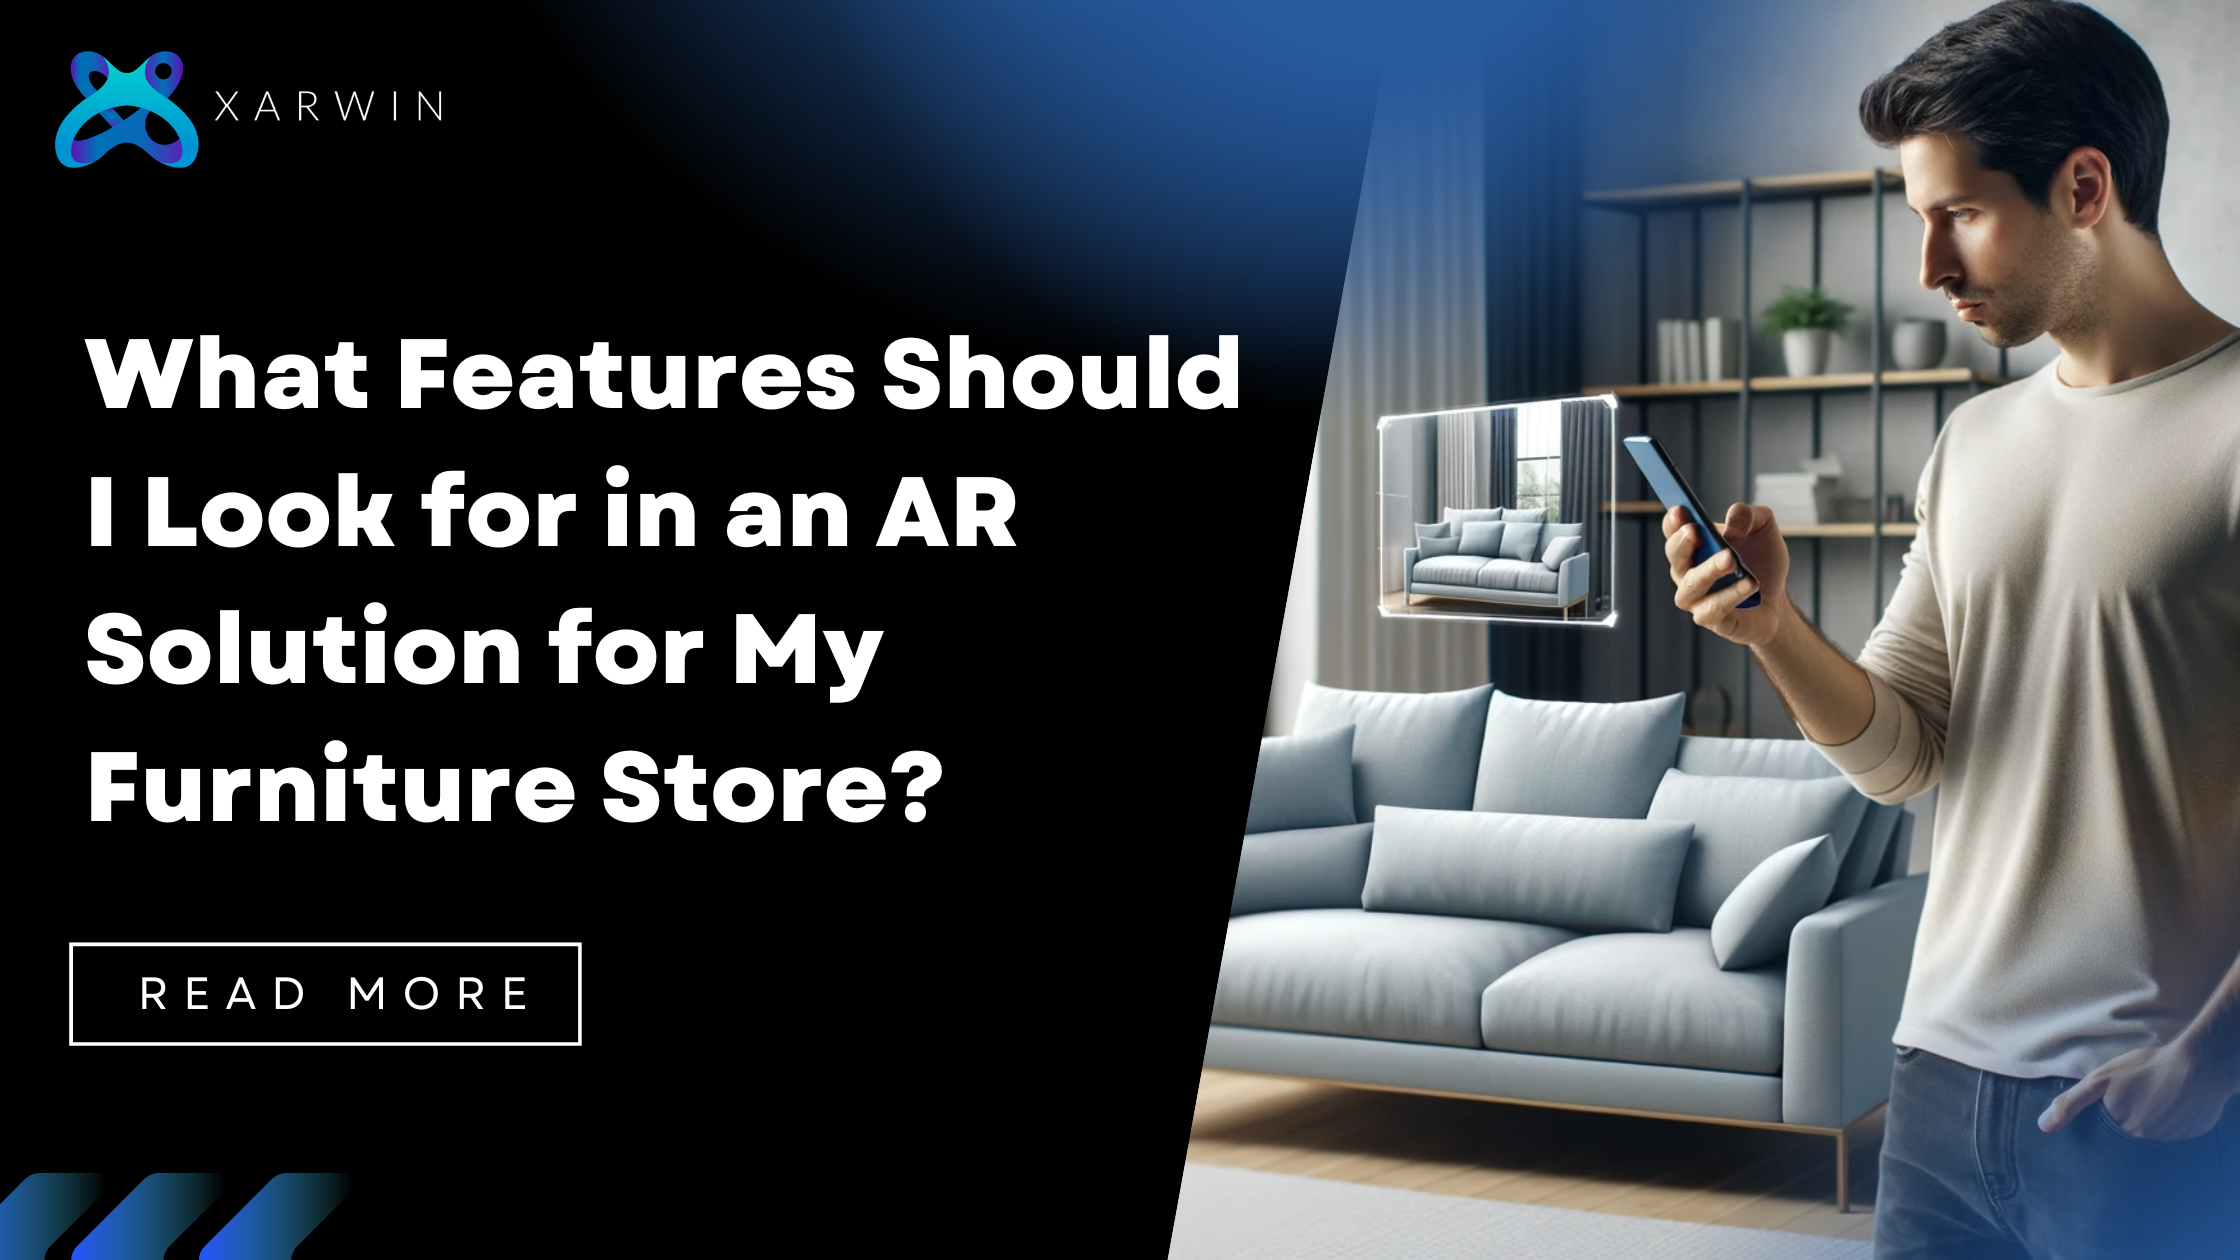 What Features Should I Look for in an AR Solution for My Furniture Store